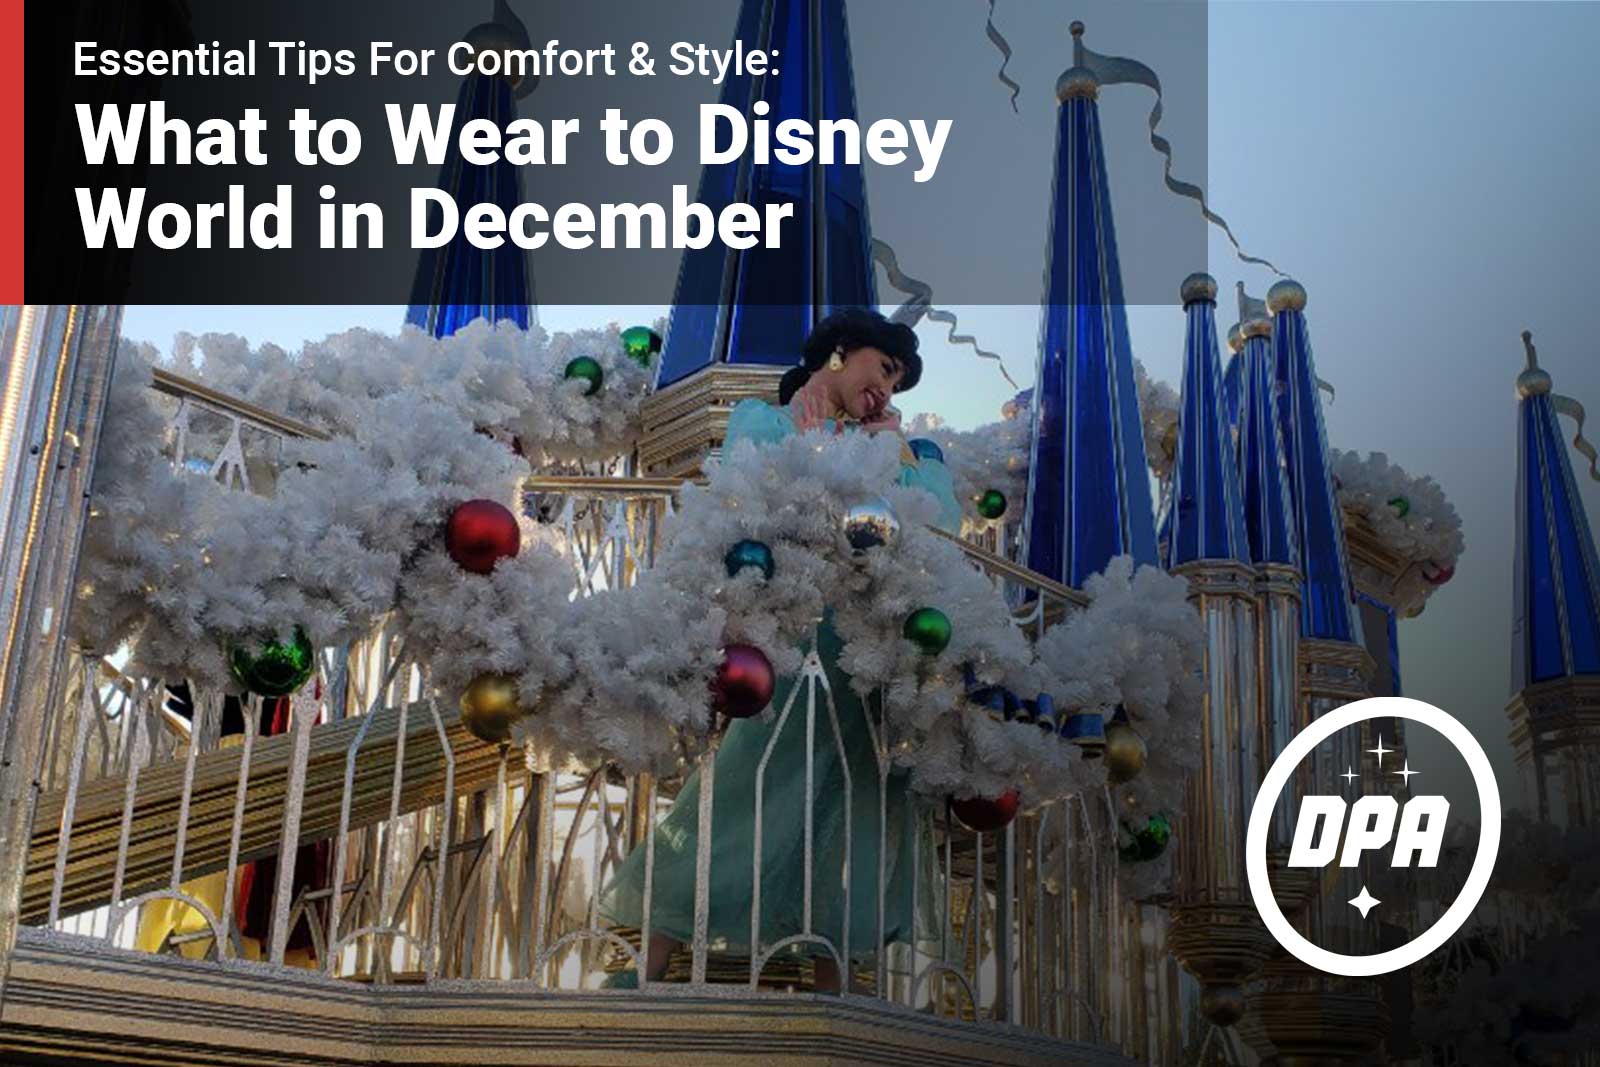 What to Wear to Disney World in December: Essential Tips for Comfort and Style